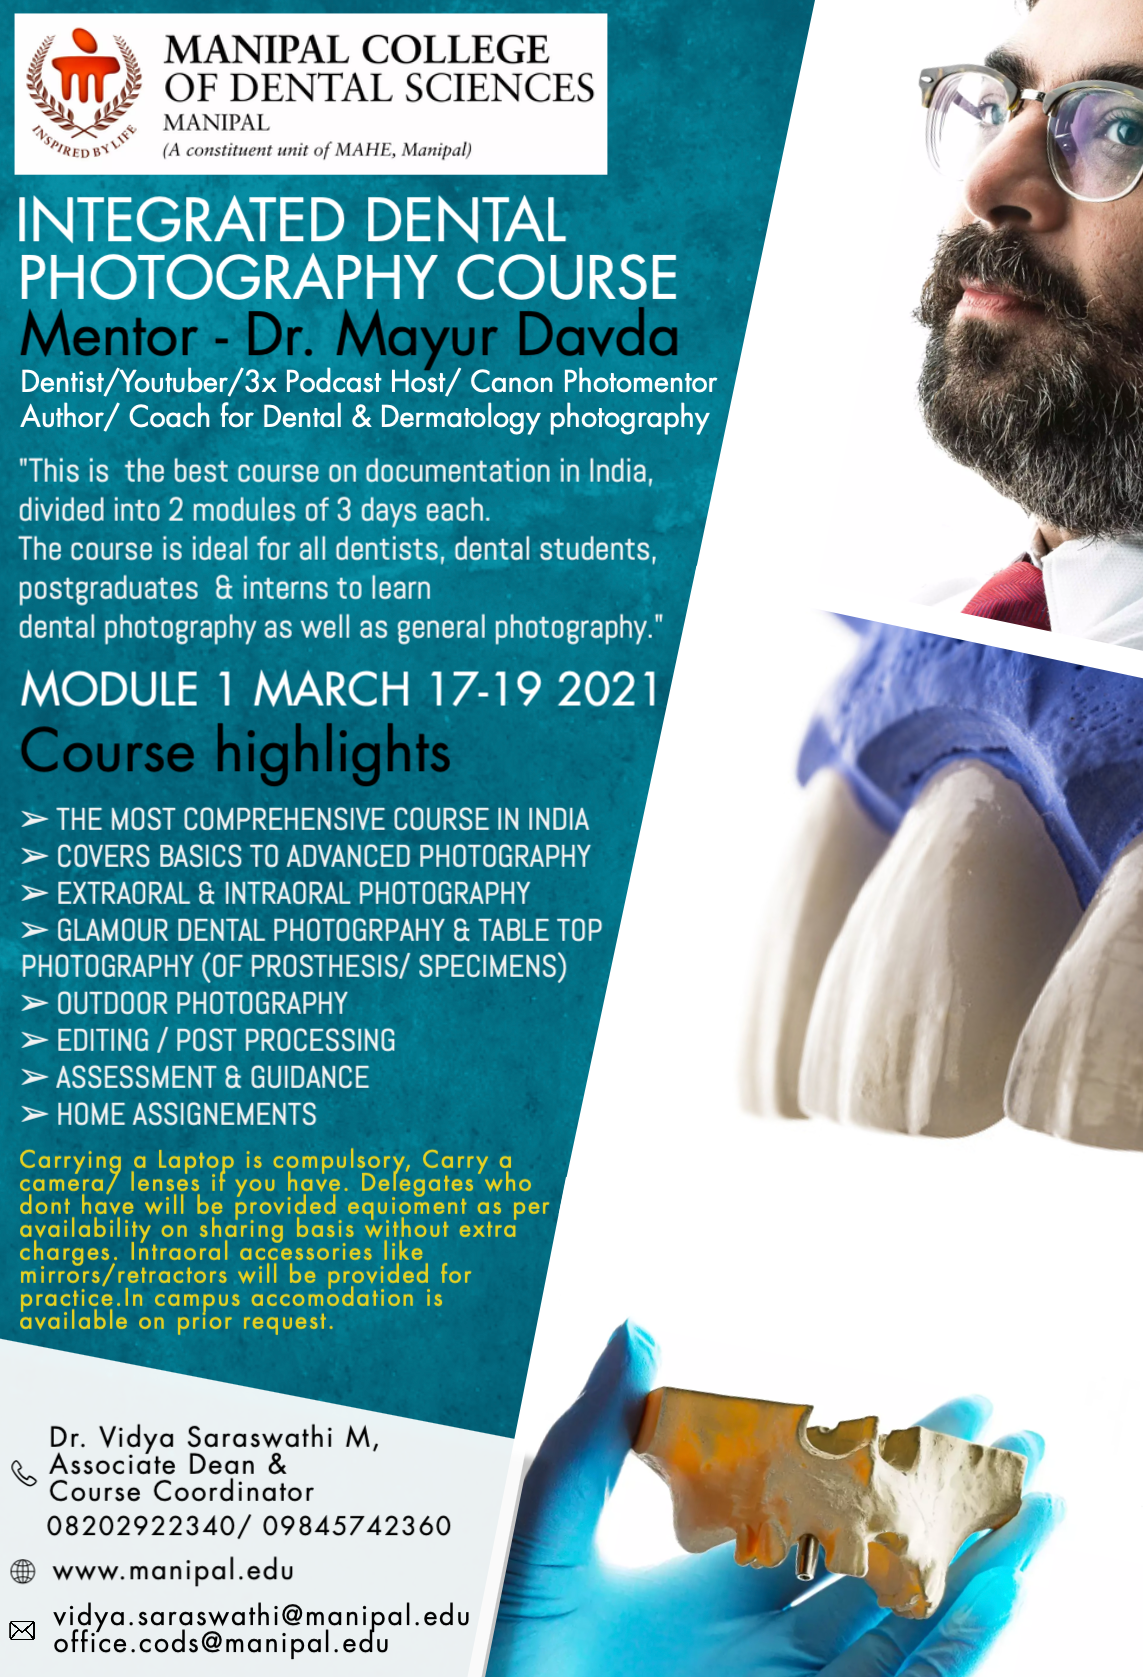 dental photography course at Manipal College of Dental Sciences - Manipal